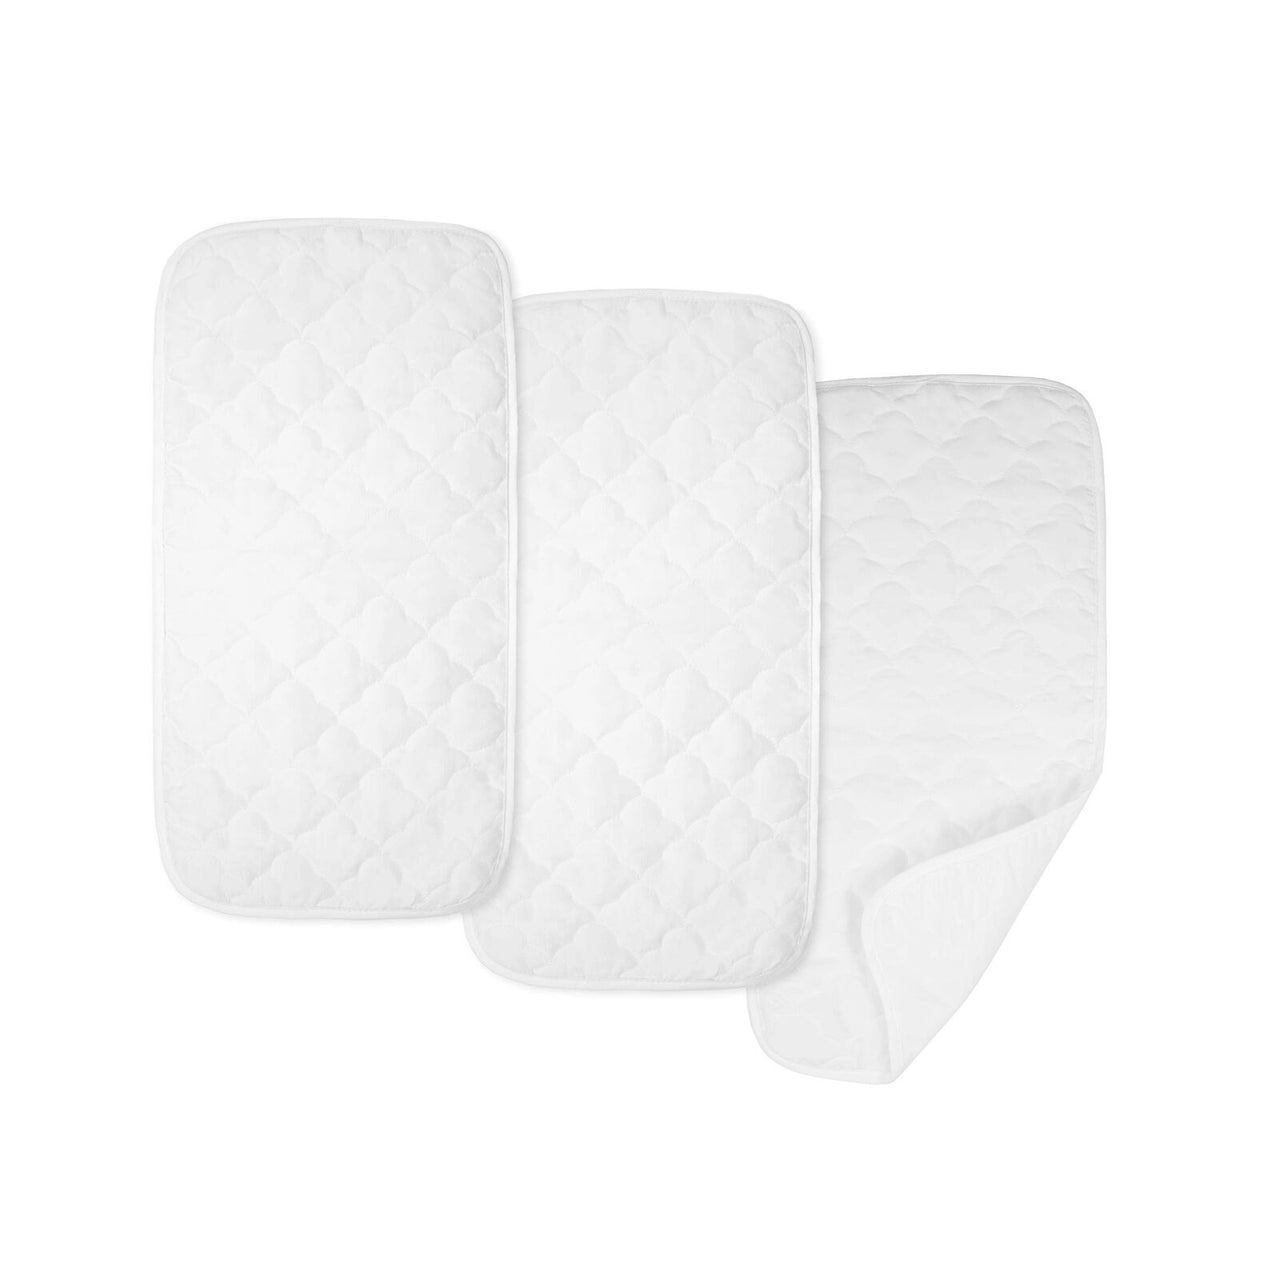 American Baby changing pad liner 3 pk.